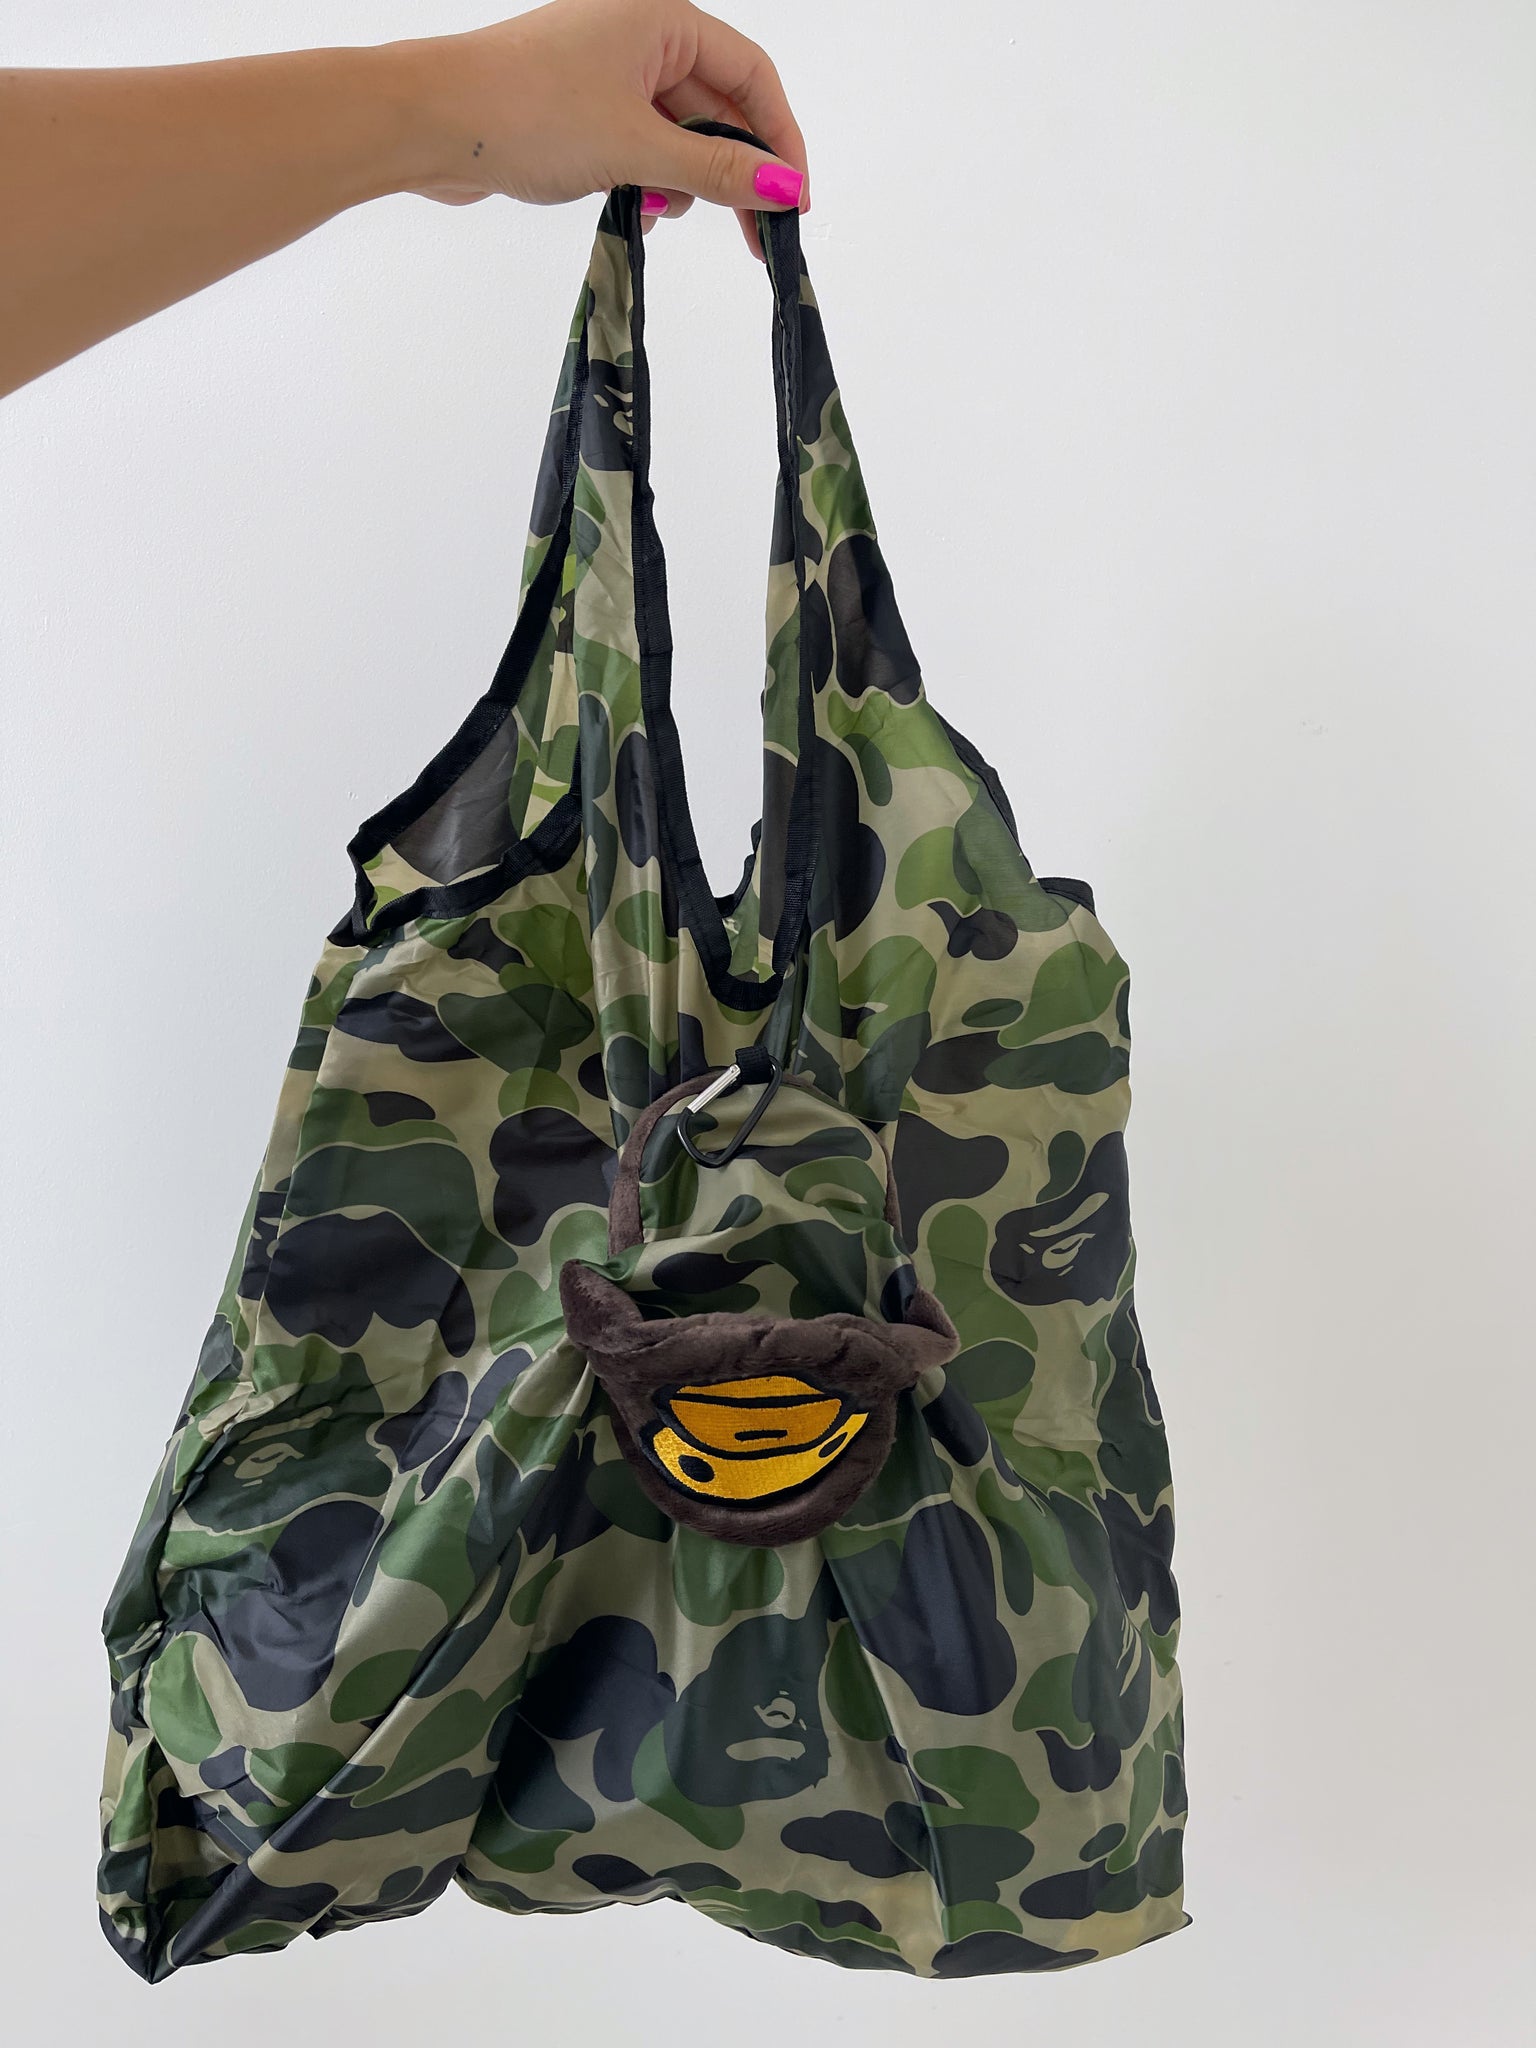 Bape x Baby Milo 2 in 1 tote and reusable bag